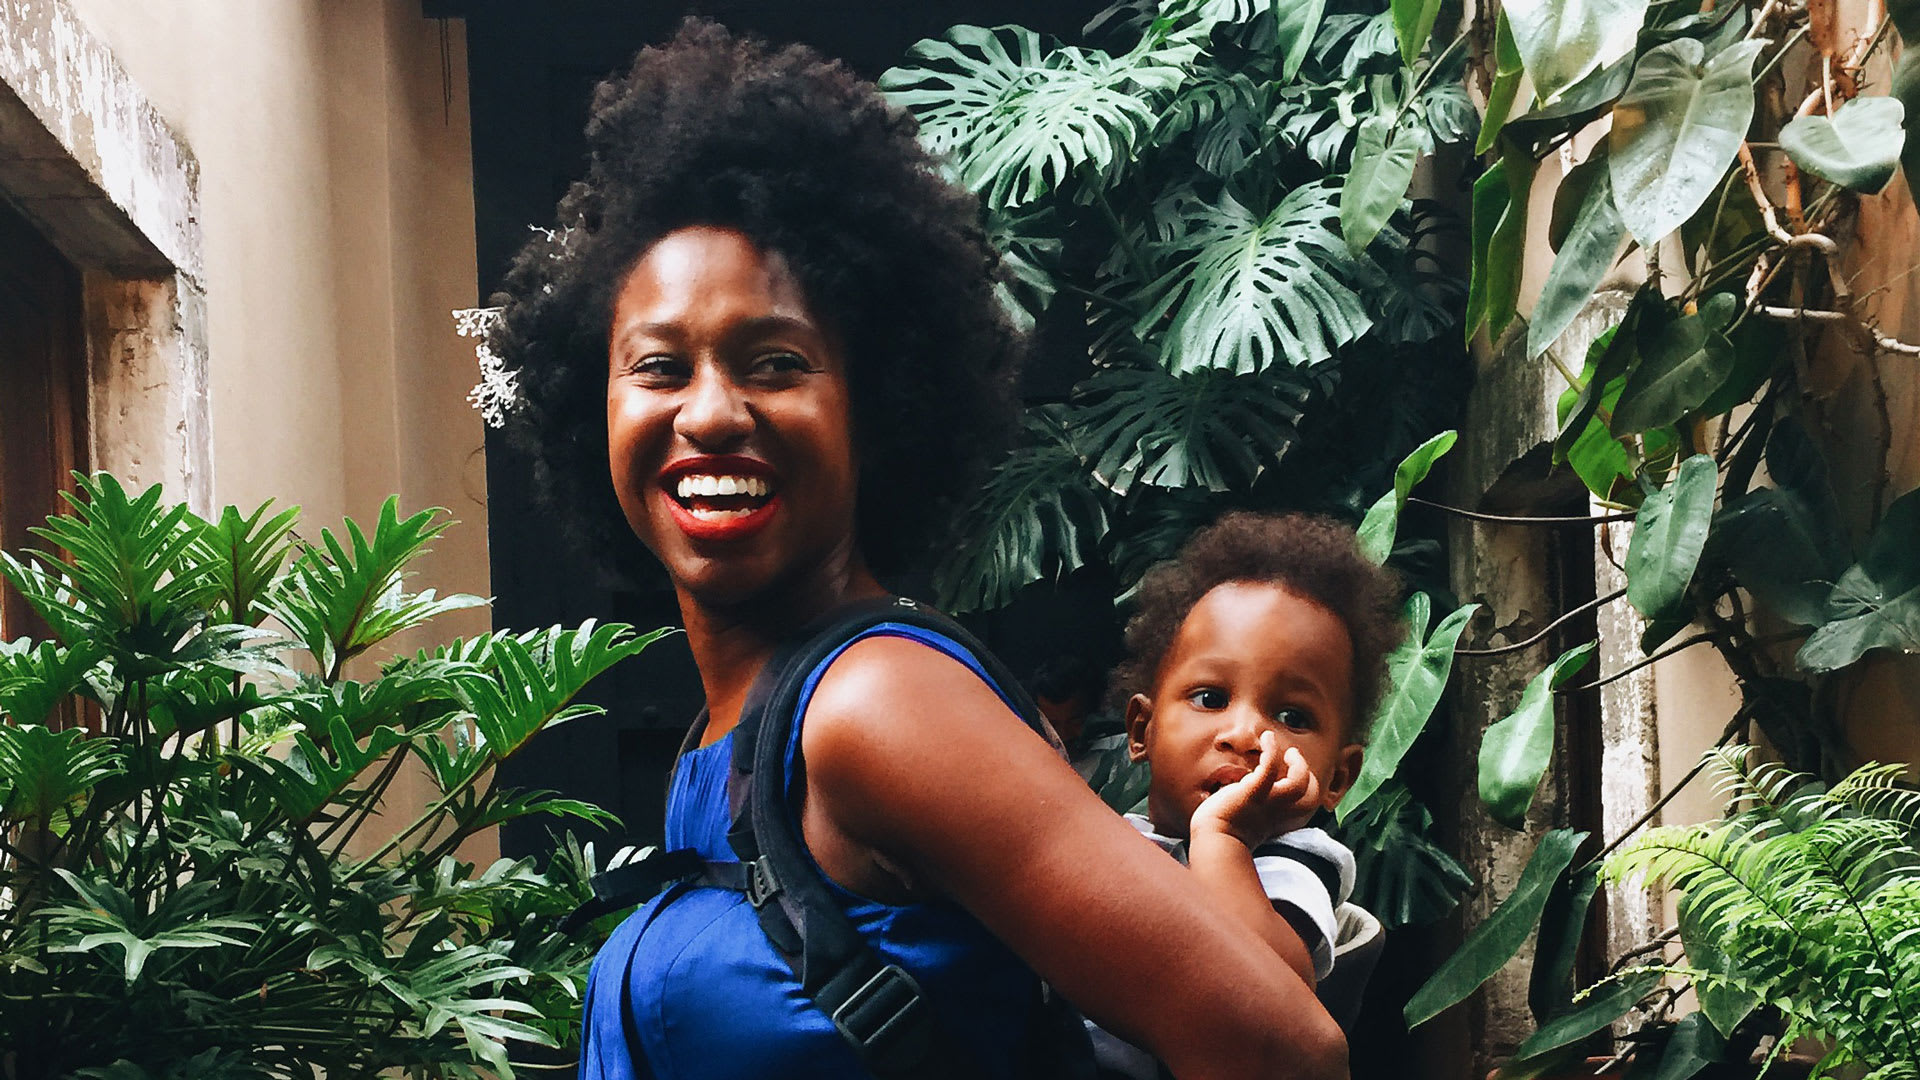 This “UX nerd” is running hackathons to tackle the POC maternal mortality crisis